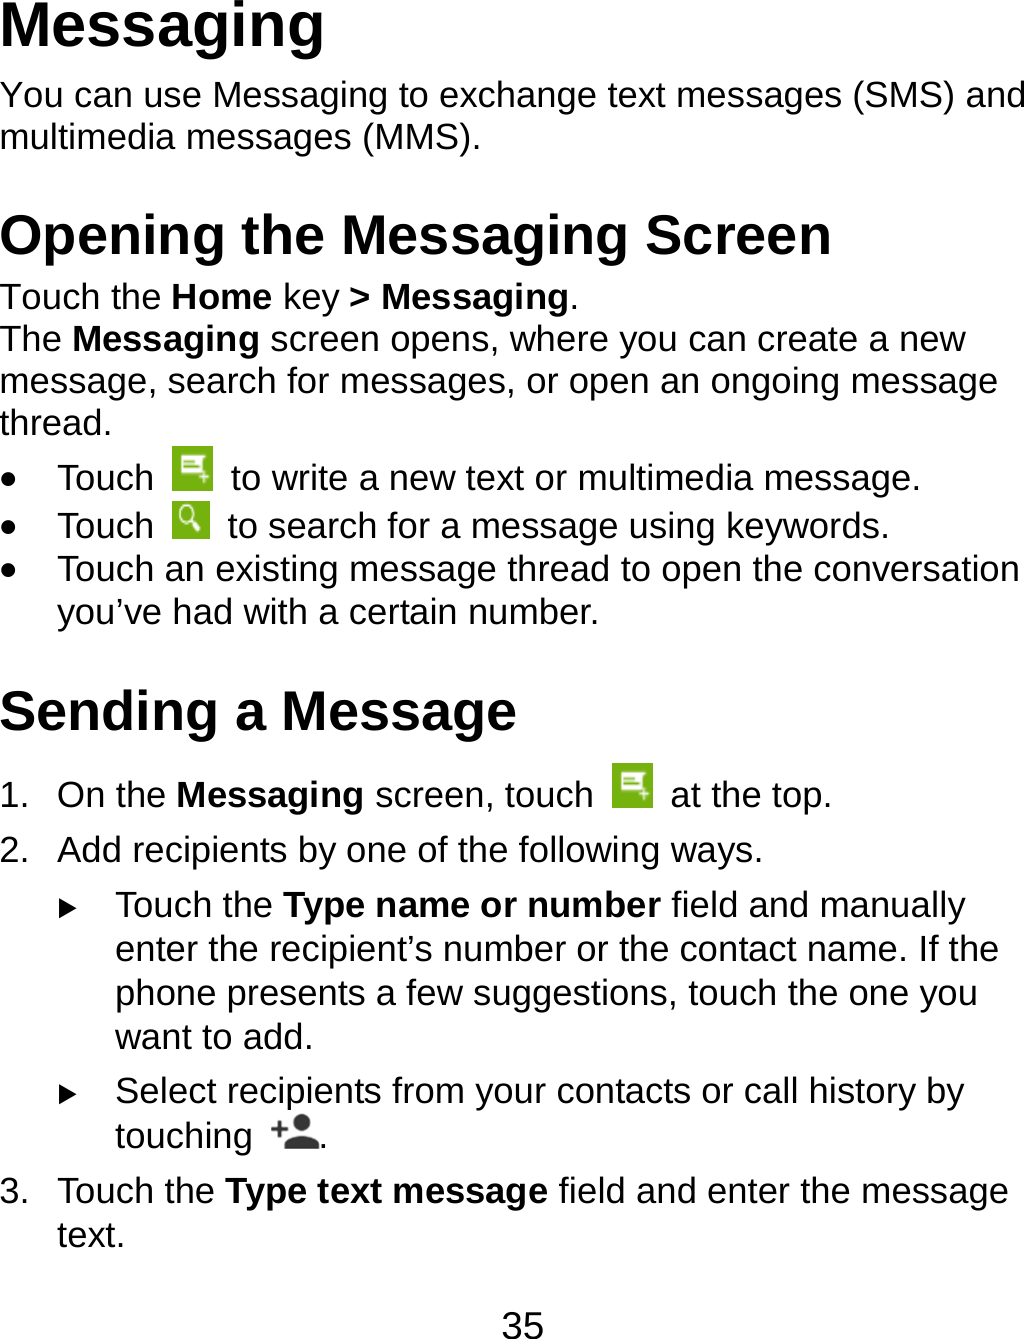 35 Messaging You can use Messaging to exchange text messages (SMS) and multimedia messages (MMS). Opening the Messaging Screen Touch the Home key &gt; Messaging. The Messaging screen opens, where you can create a new message, search for messages, or open an ongoing message thread.  Touch    to write a new text or multimedia message.  Touch    to search for a message using keywords.  Touch an existing message thread to open the conversation you’ve had with a certain number.   Sending a Message 1. On the Messaging screen, touch    at the top. 2.  Add recipients by one of the following ways.  Touch the Type name or number field and manually enter the recipient’s number or the contact name. If the phone presents a few suggestions, touch the one you want to add.  Select recipients from your contacts or call history by touching  . 3. Touch the Type text message field and enter the message text. 